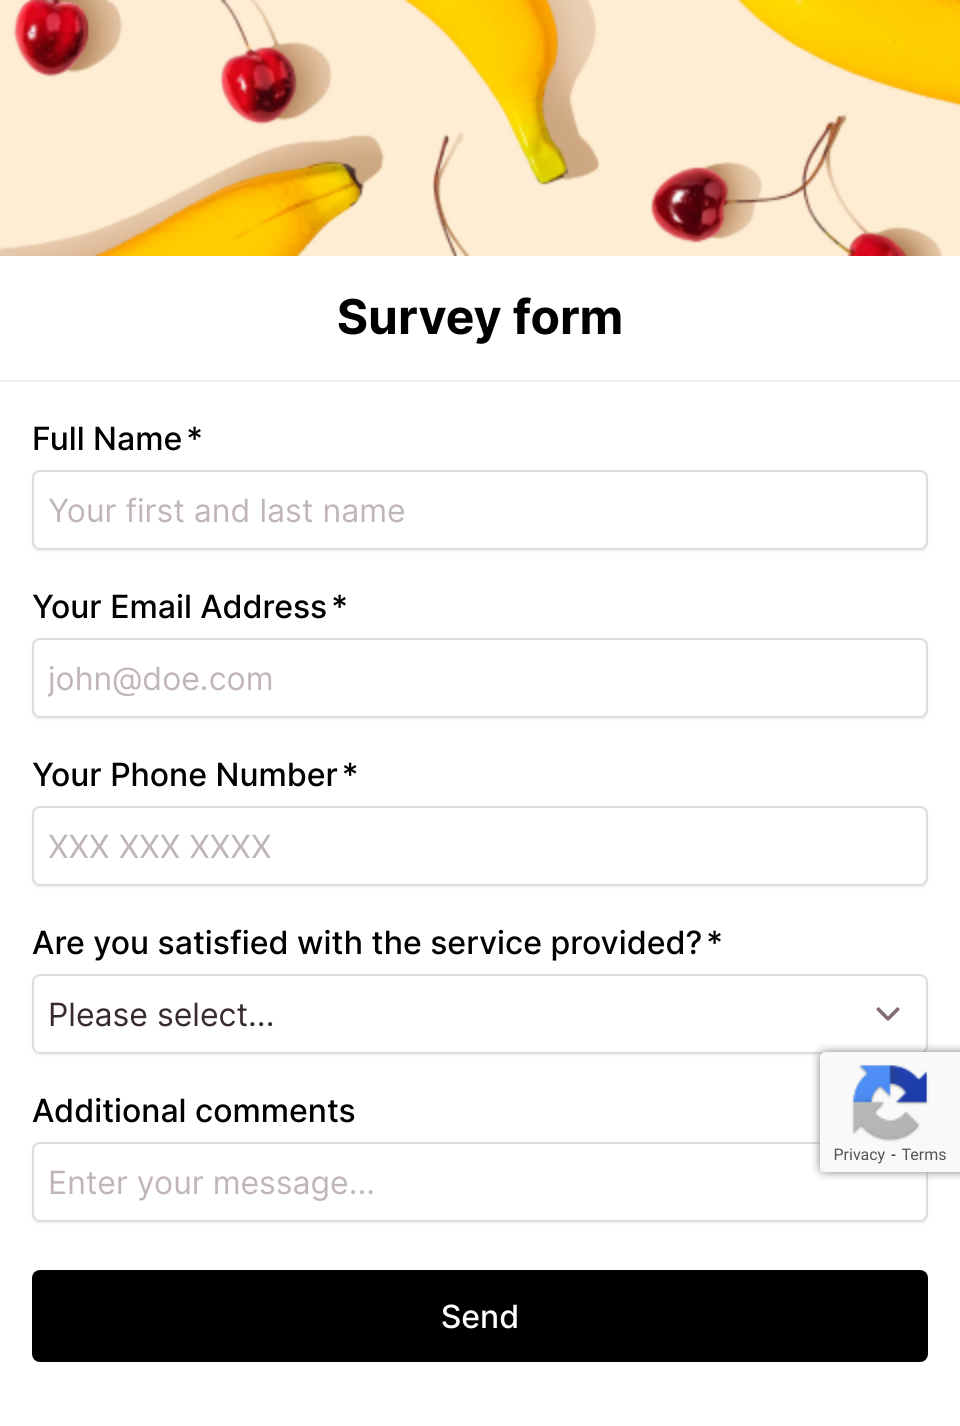 Survey form example